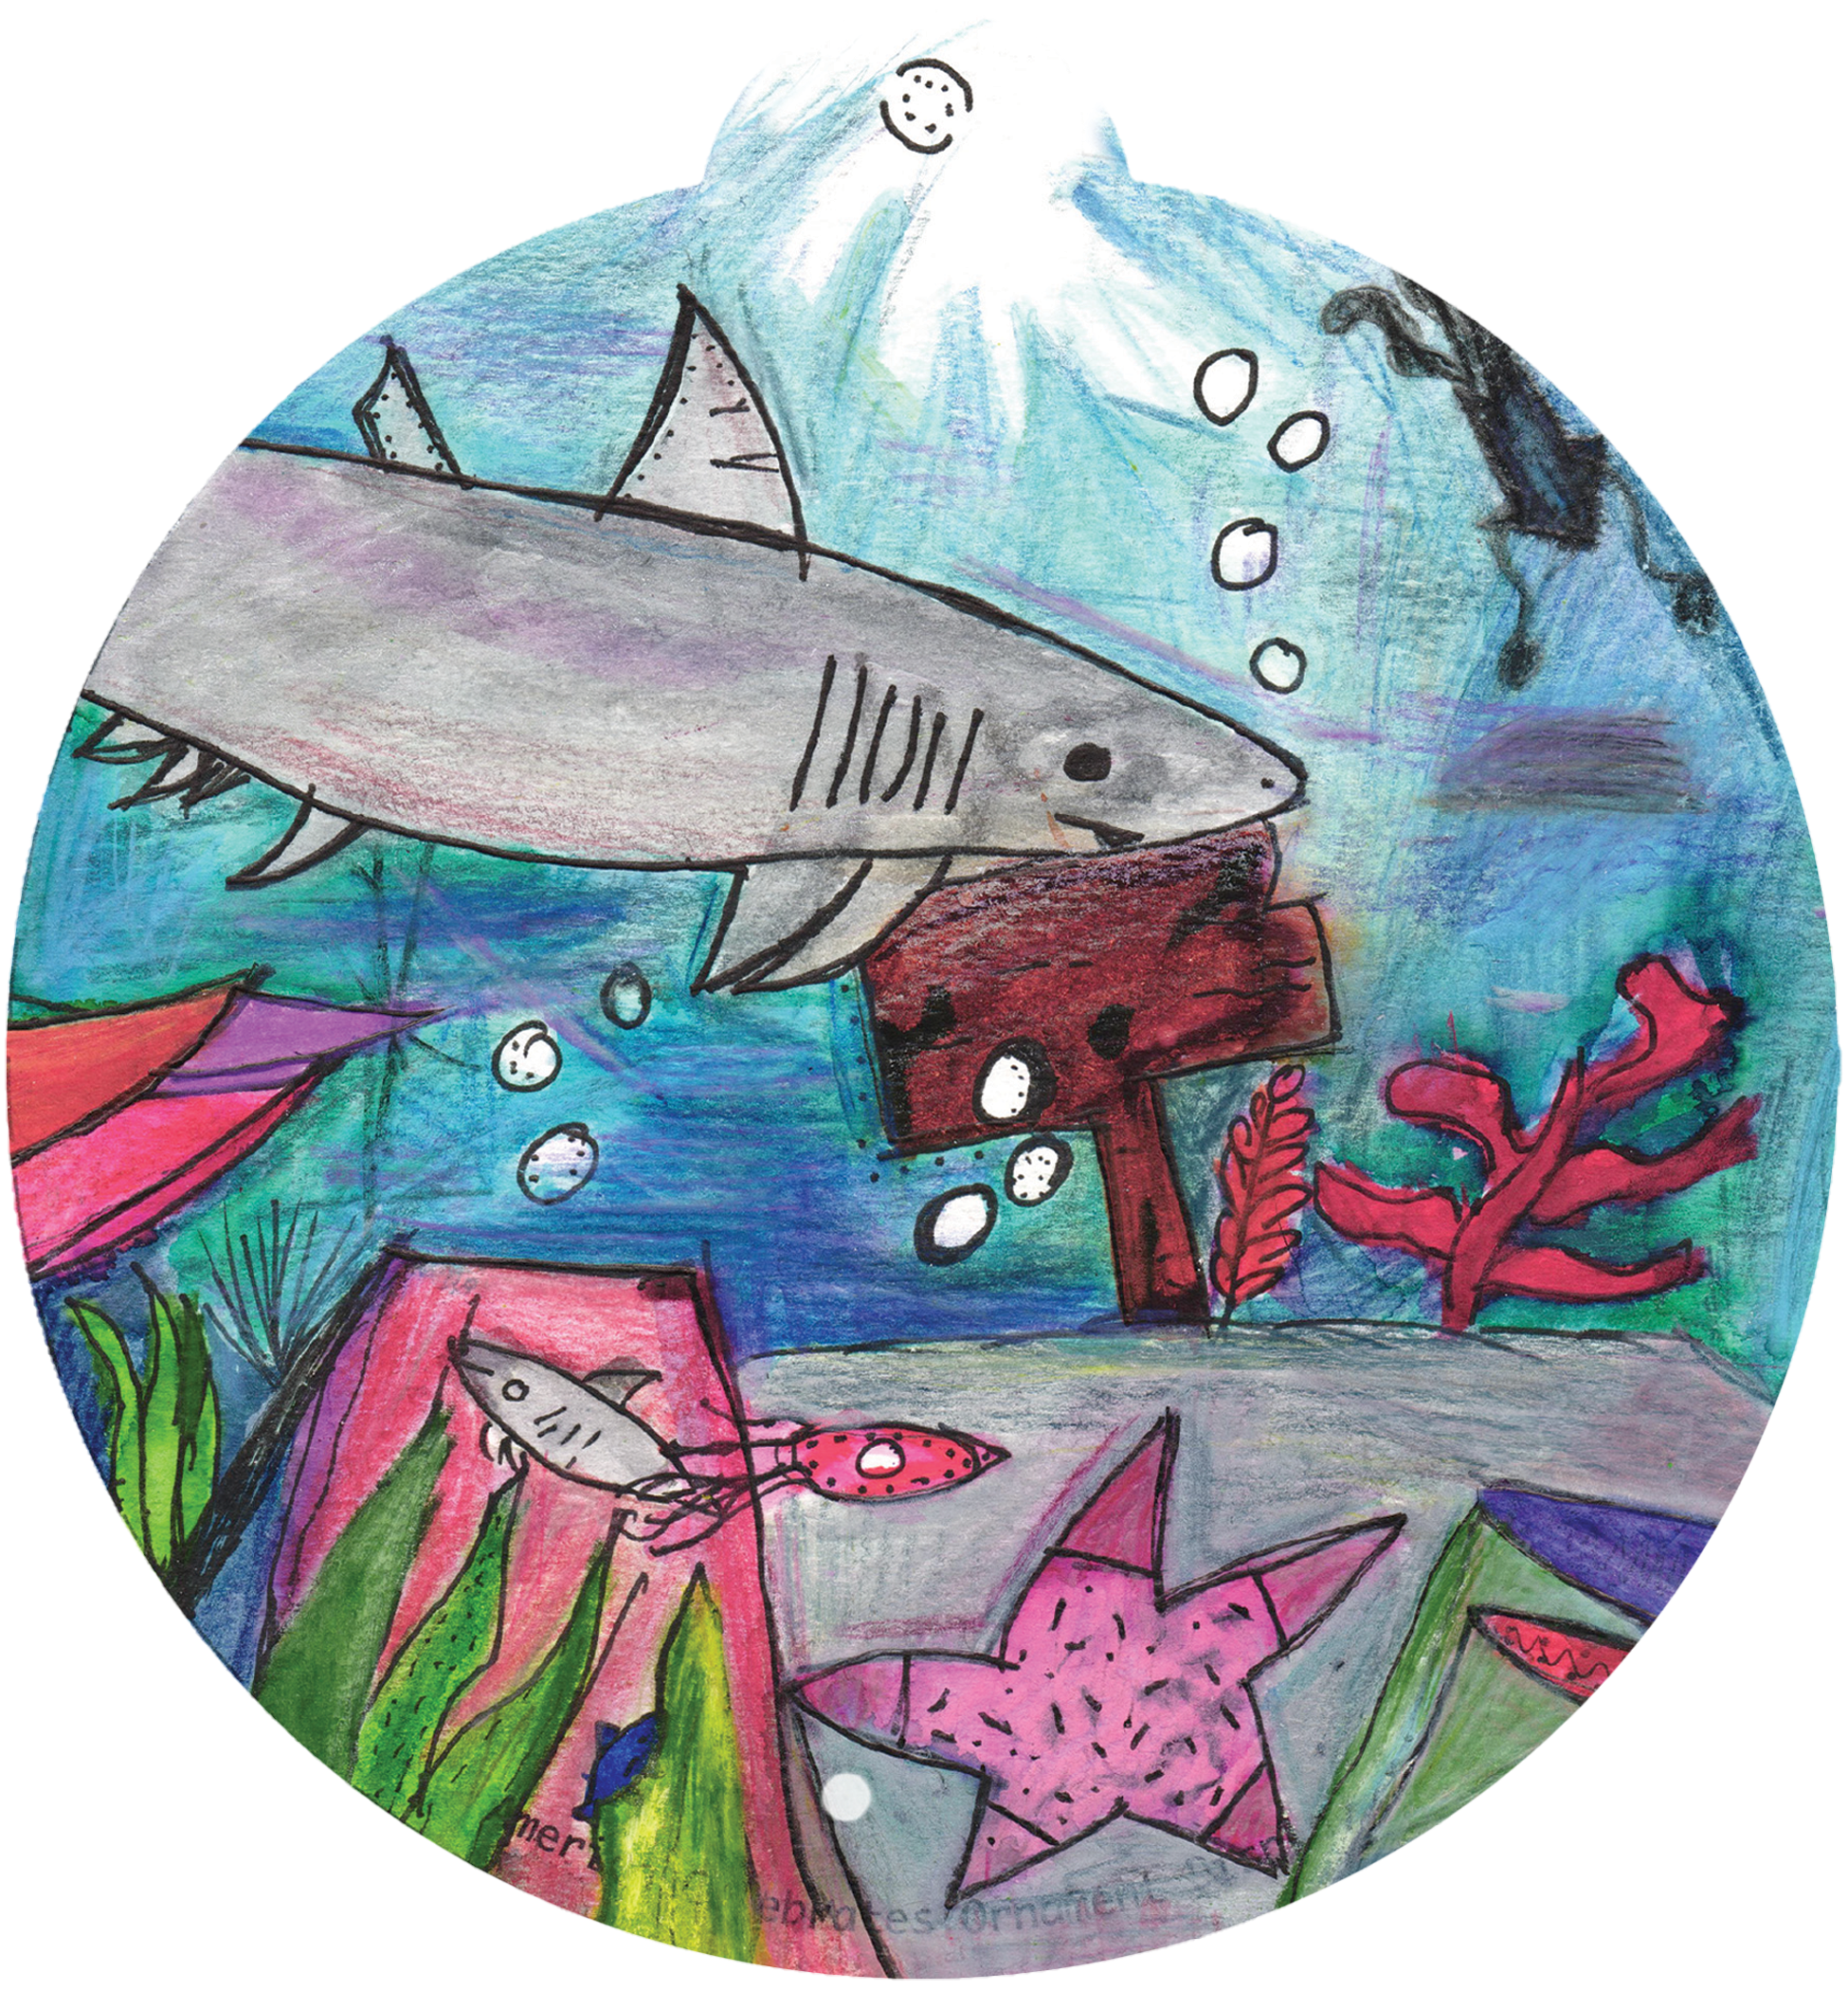 ornament depicting an underwater scene with a shark, starfish, and other fish